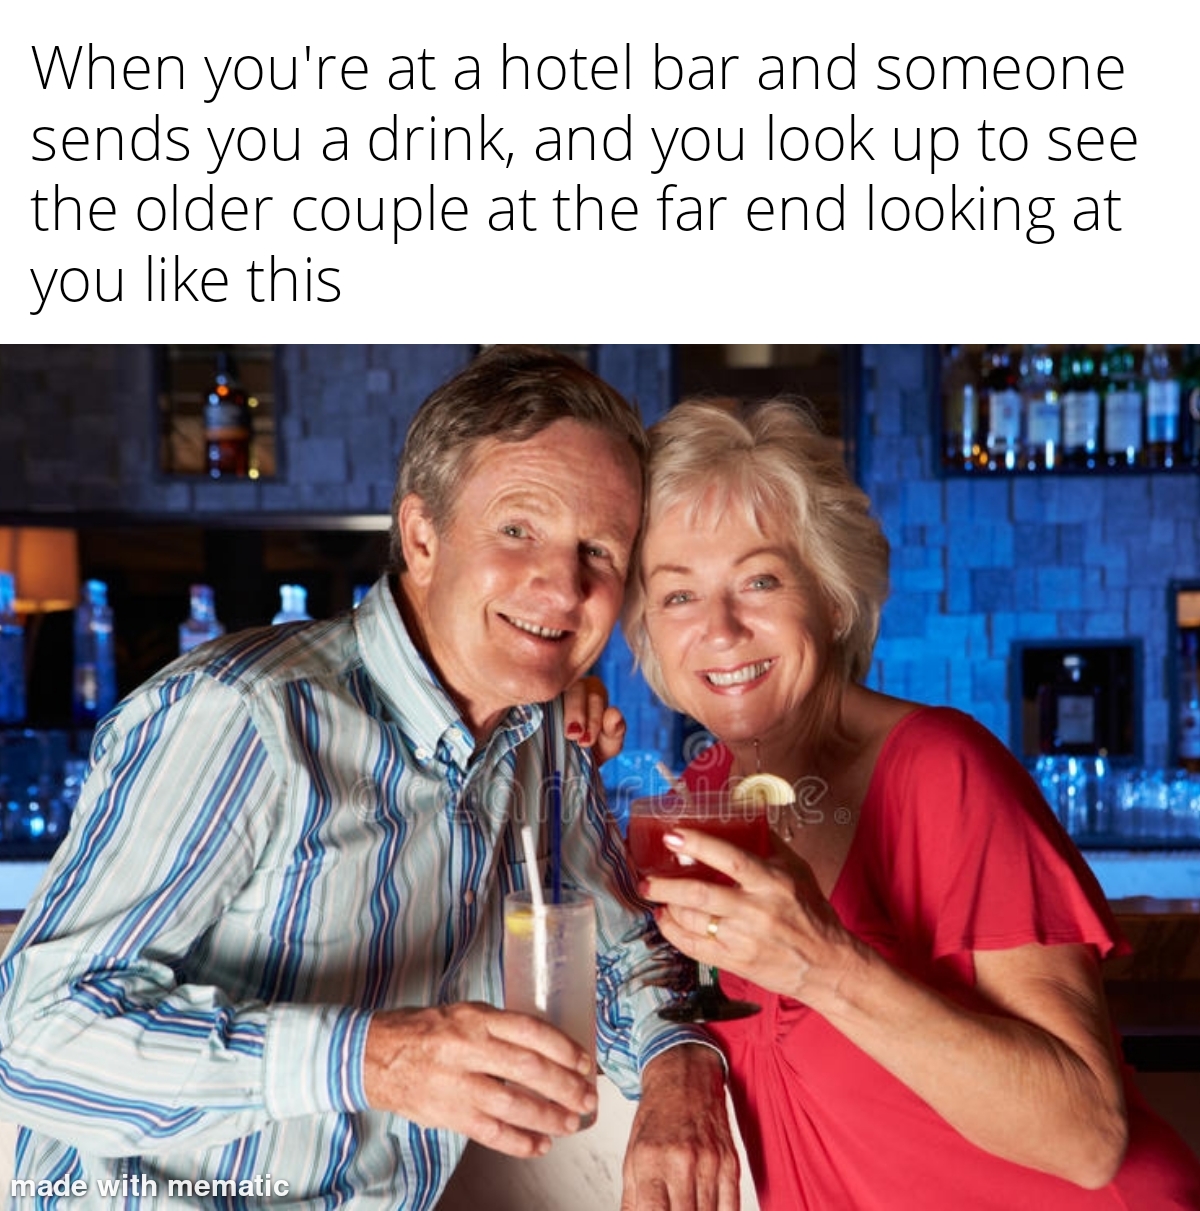 friendship - When you're at a hotel bar and someone sends you a drink, and you look up to see the older couple at the far end looking at you this Le! Gm made with mematic